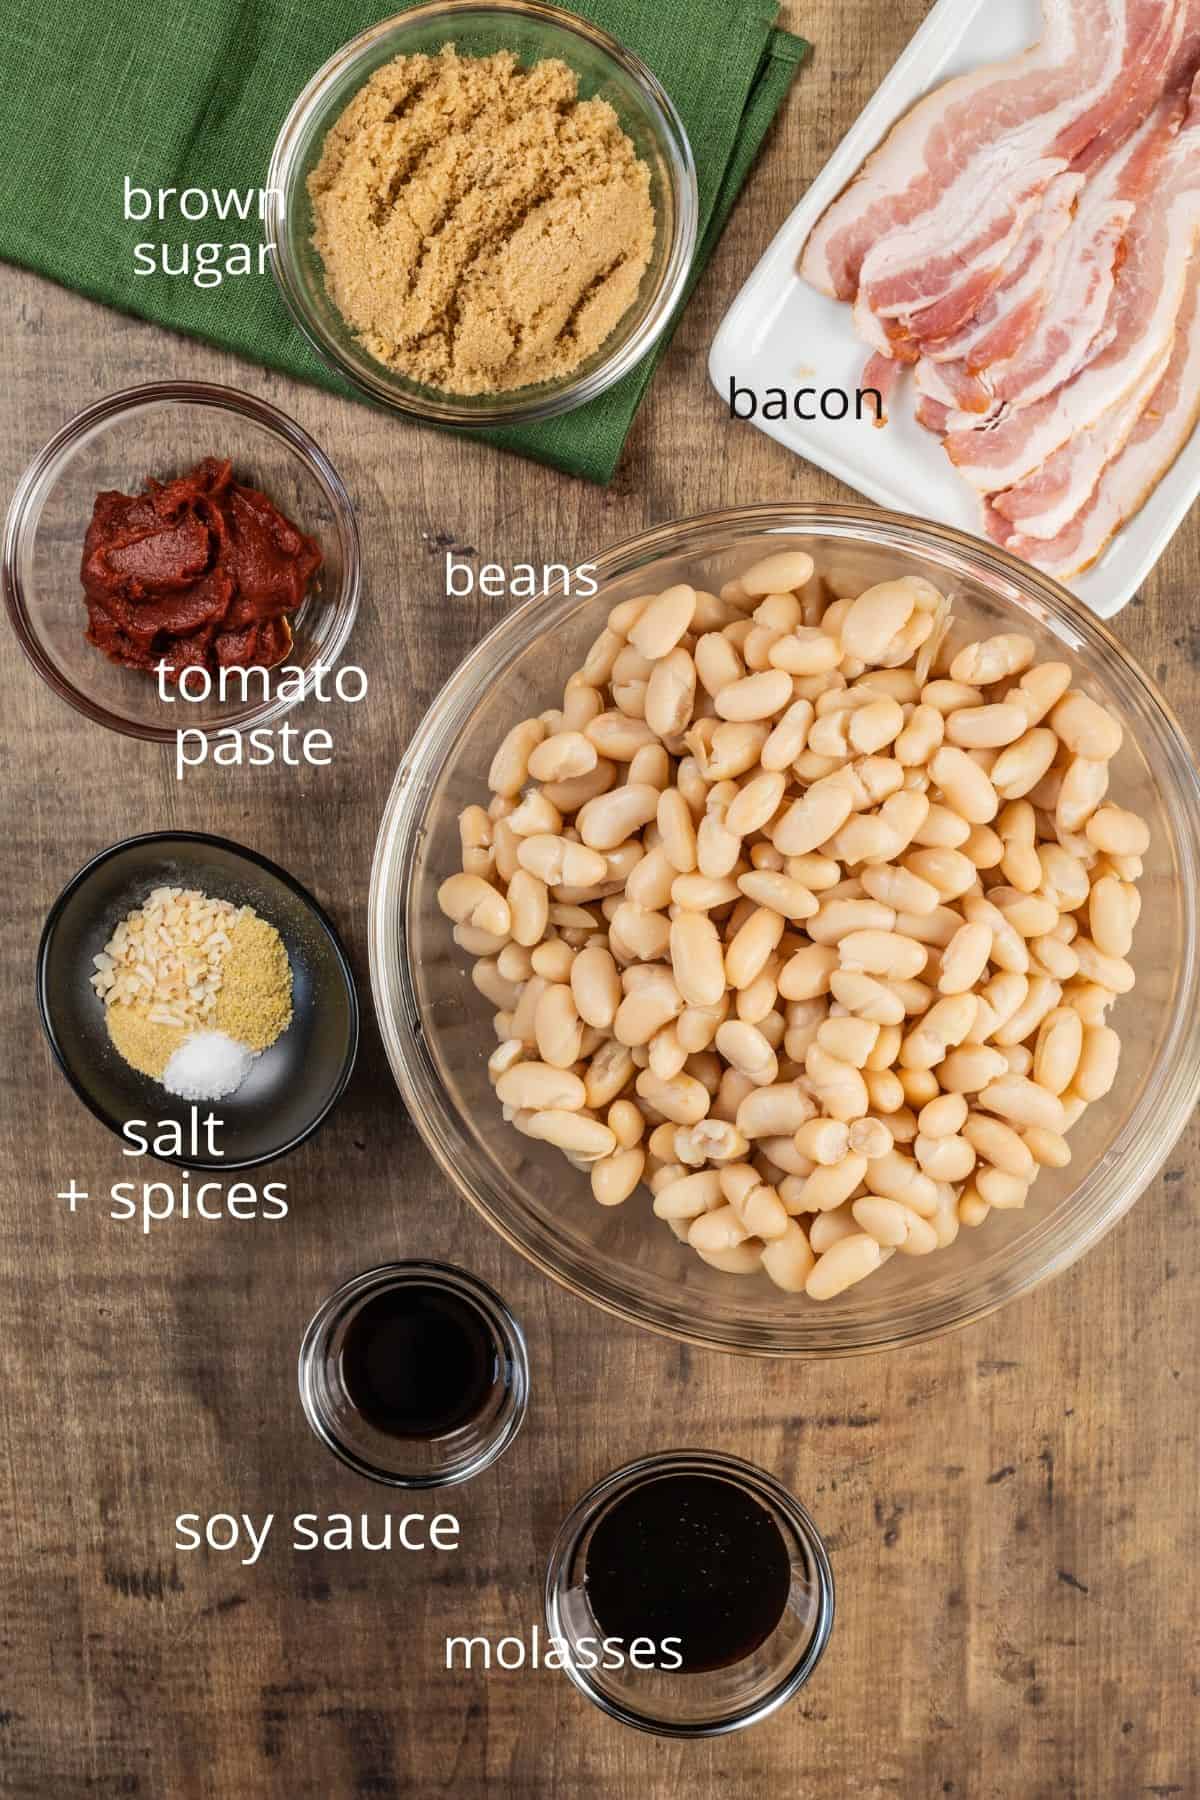 ingredients for baked beans in various glass bowls on the wood table 